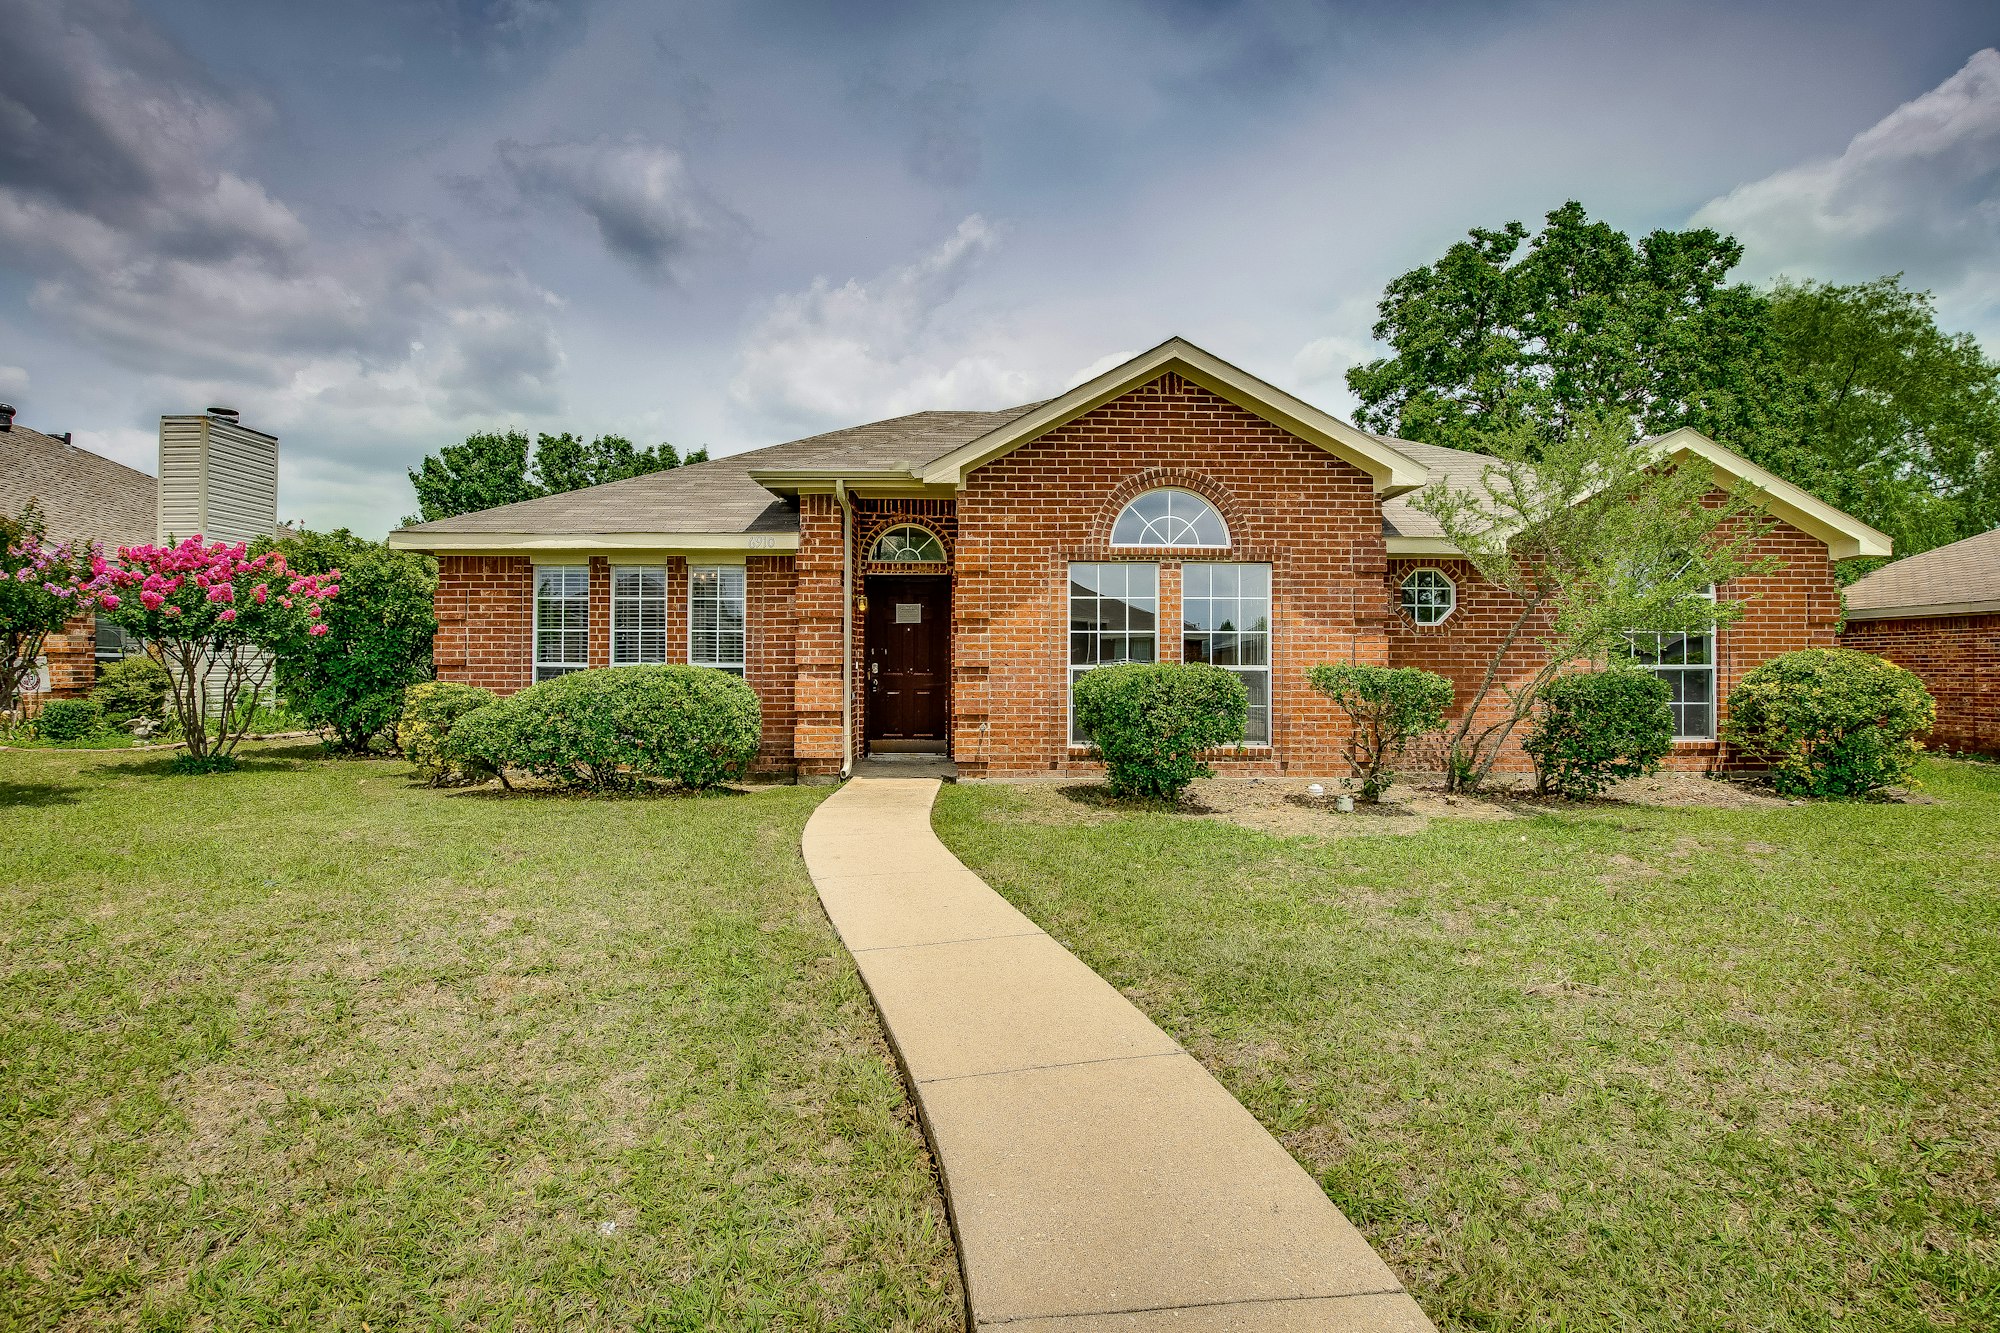 Photo 1 of 28 - 6910 Todd Ln, Sachse, TX 75048